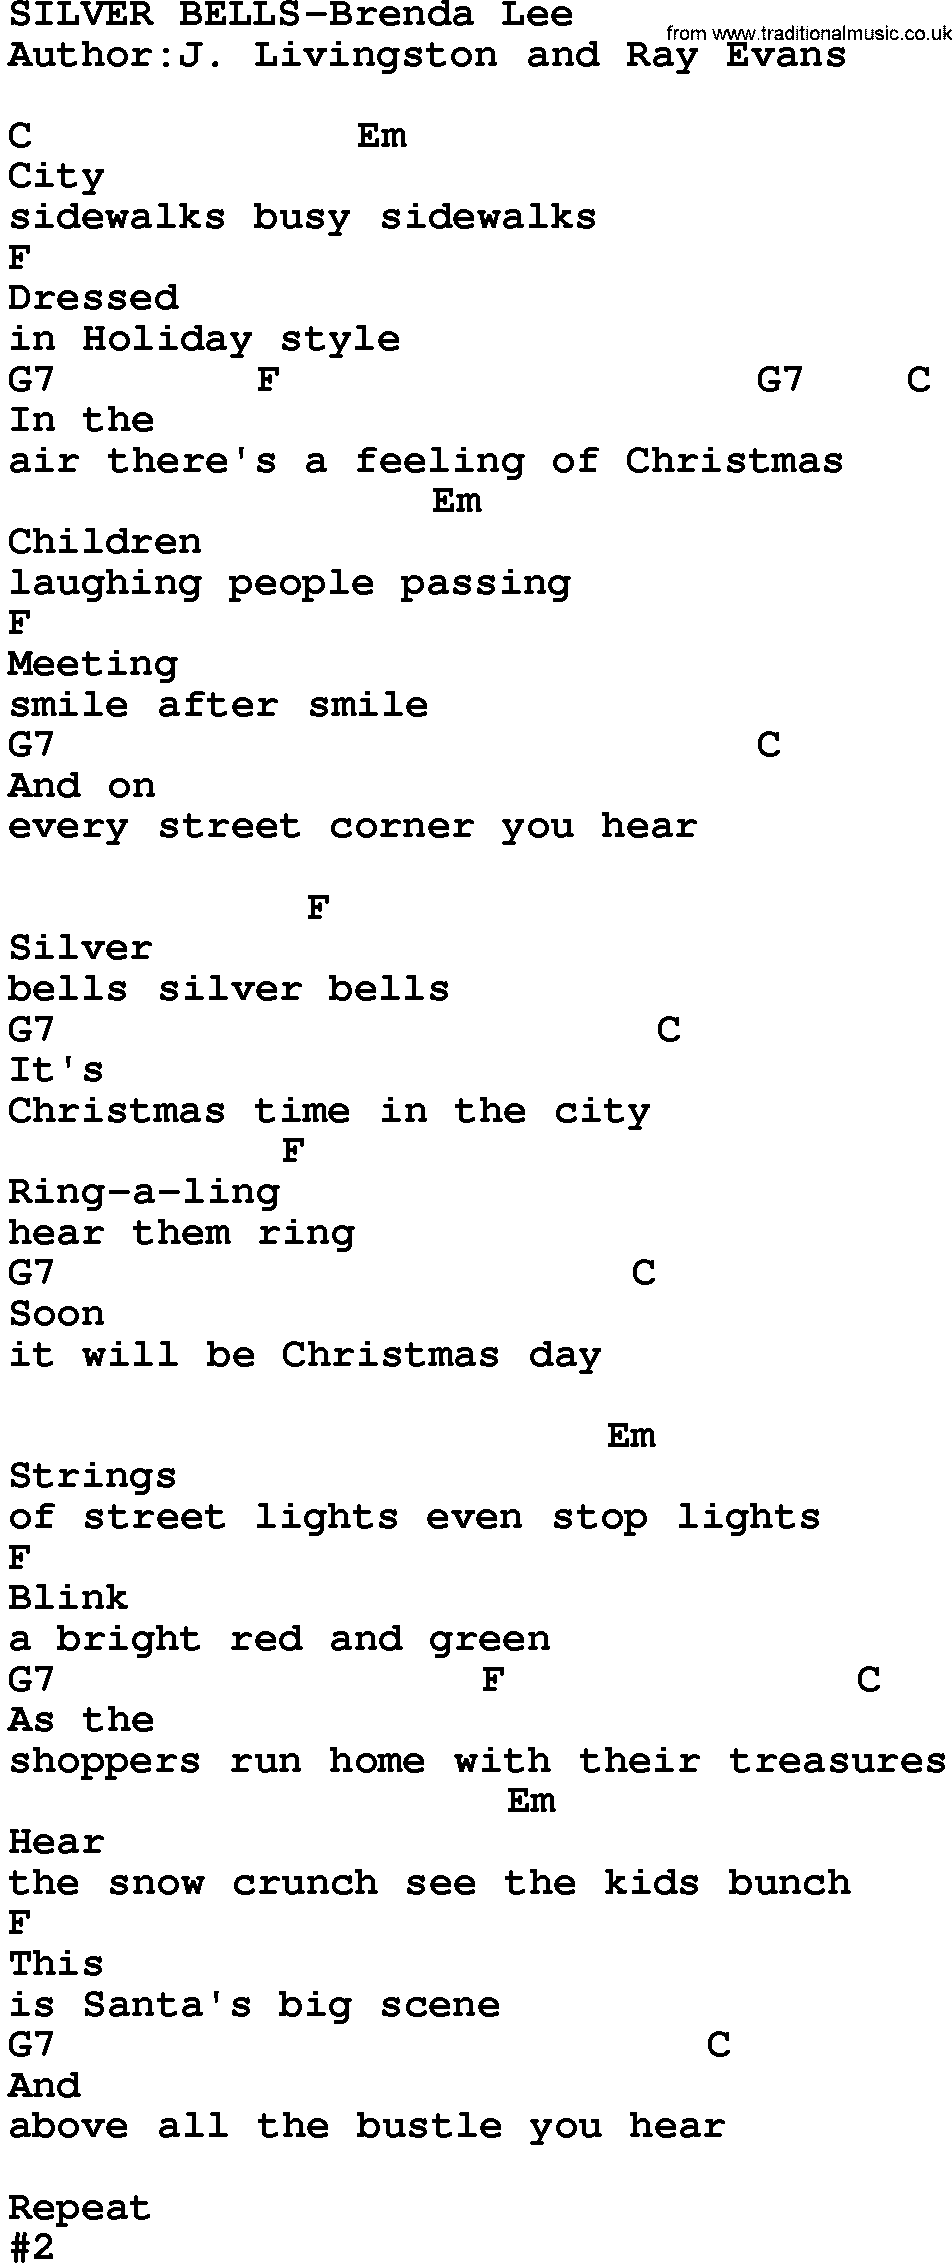 Country music song: Silver Bells-Brenda Lee lyrics and chords